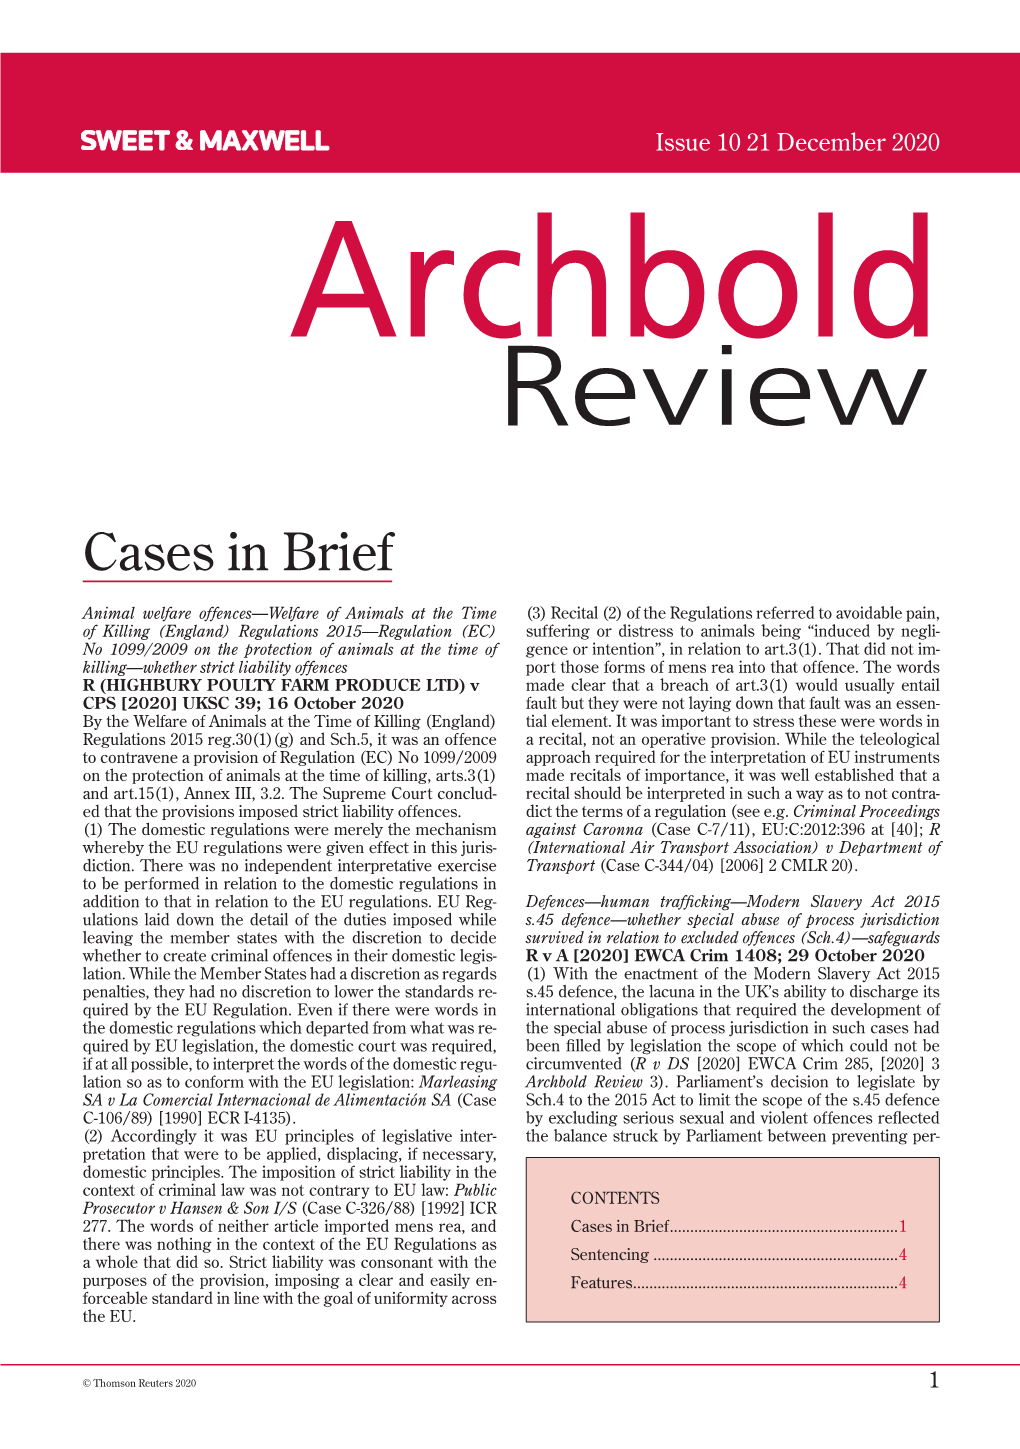 Archbold-Review-Issue-10-2020.Pdf